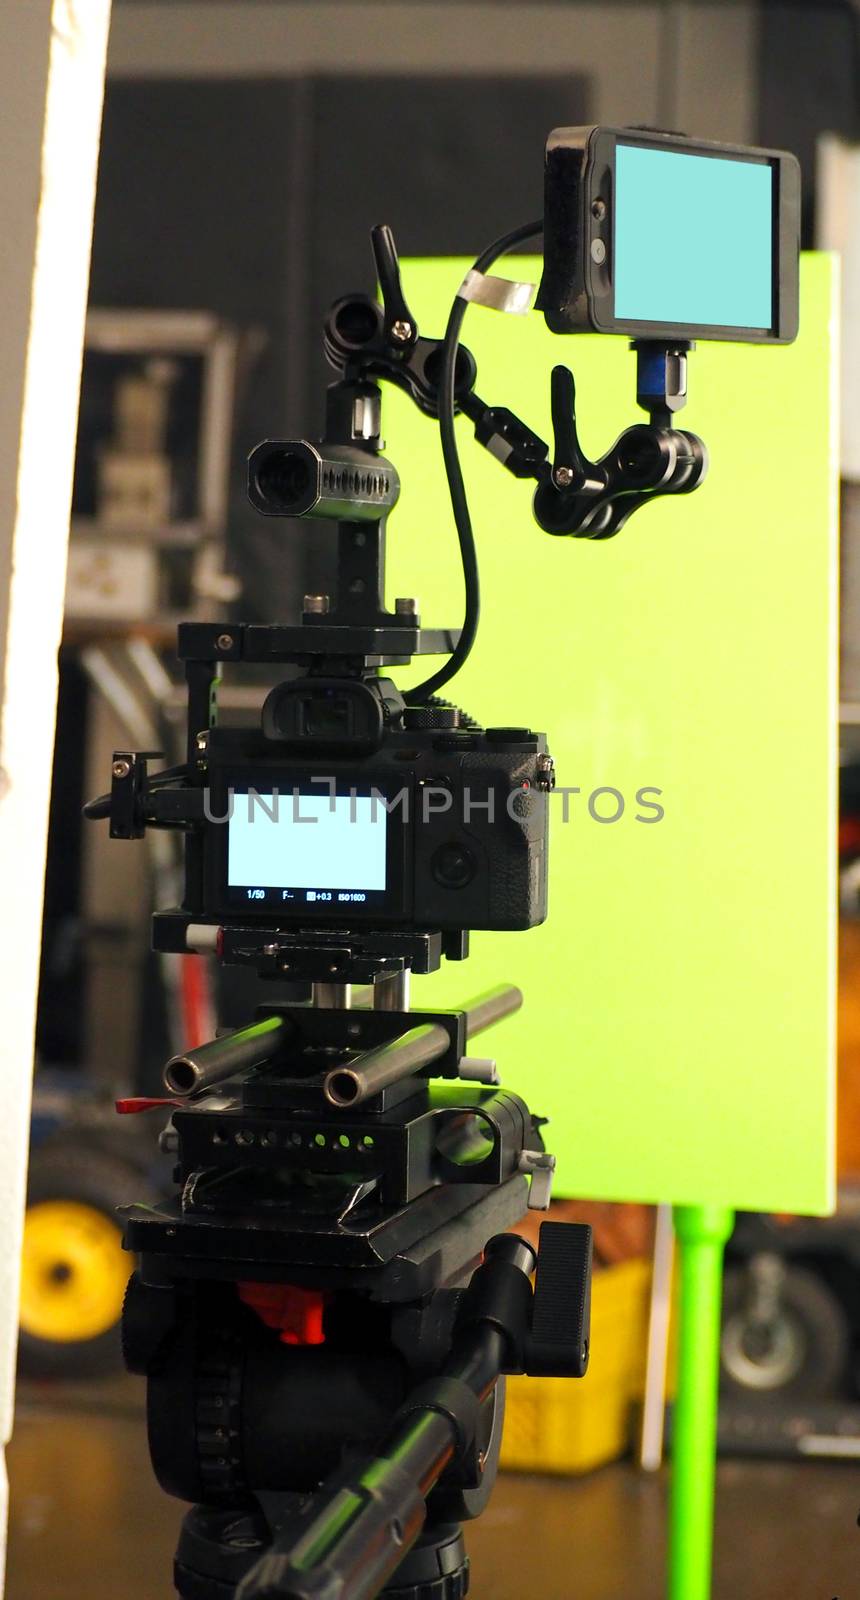 Behind the vdo camera shooting in studio production by gnepphoto